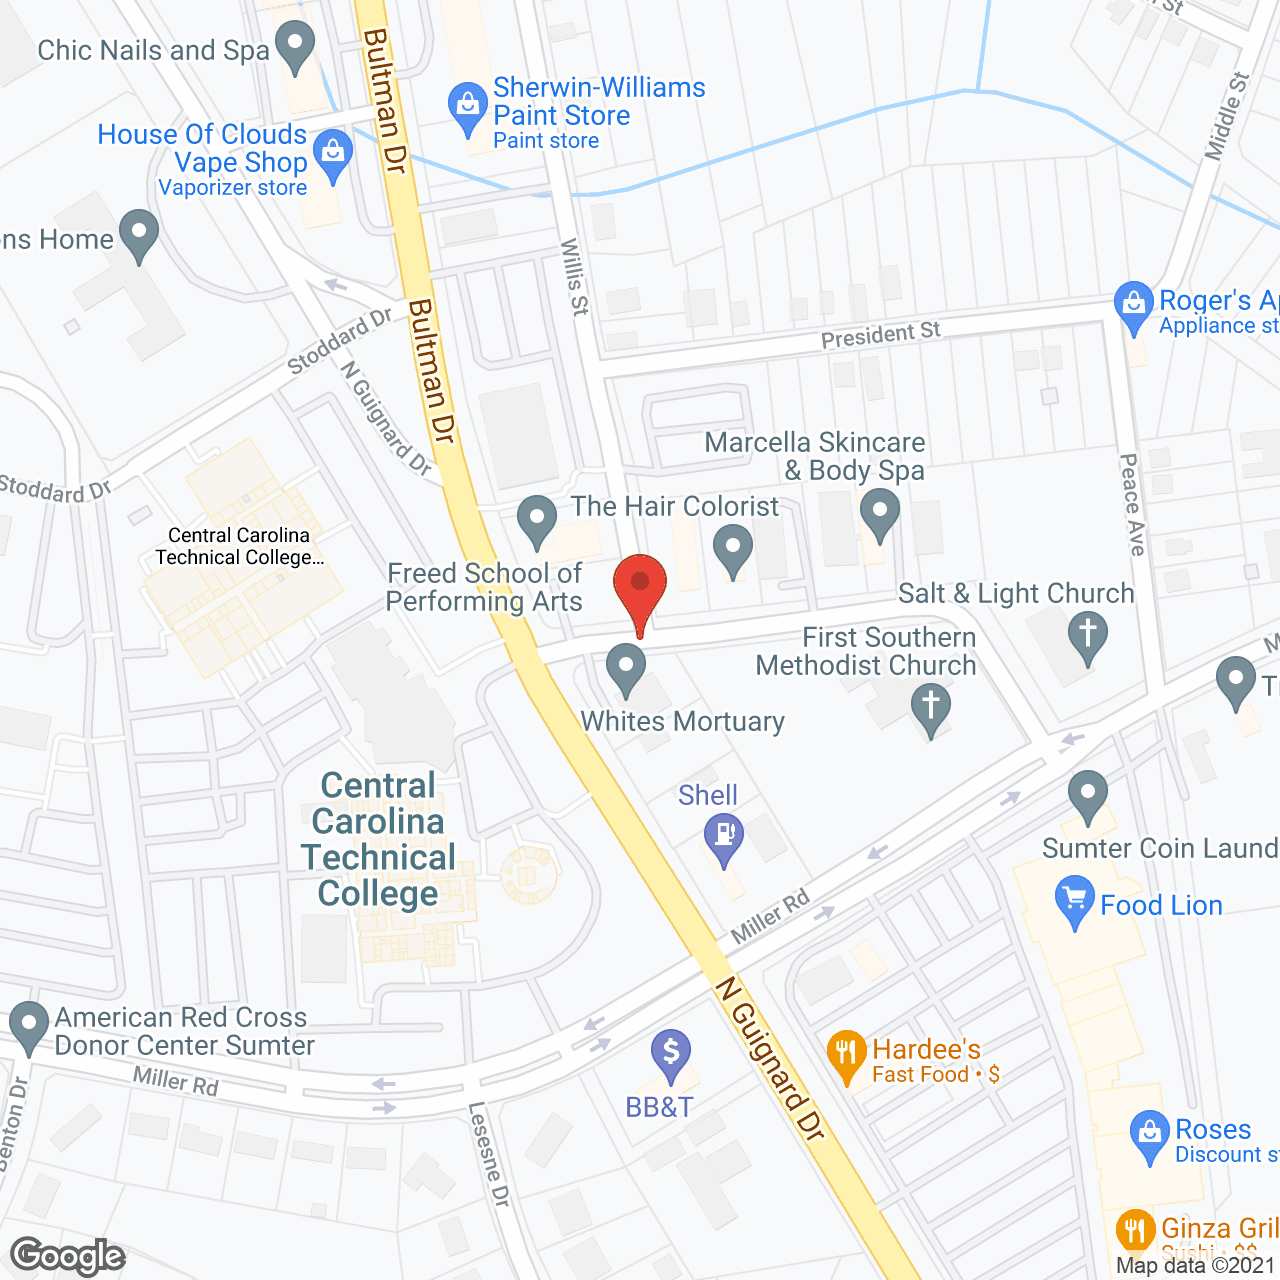 Comfort Keepers of Sumter, SC in google map